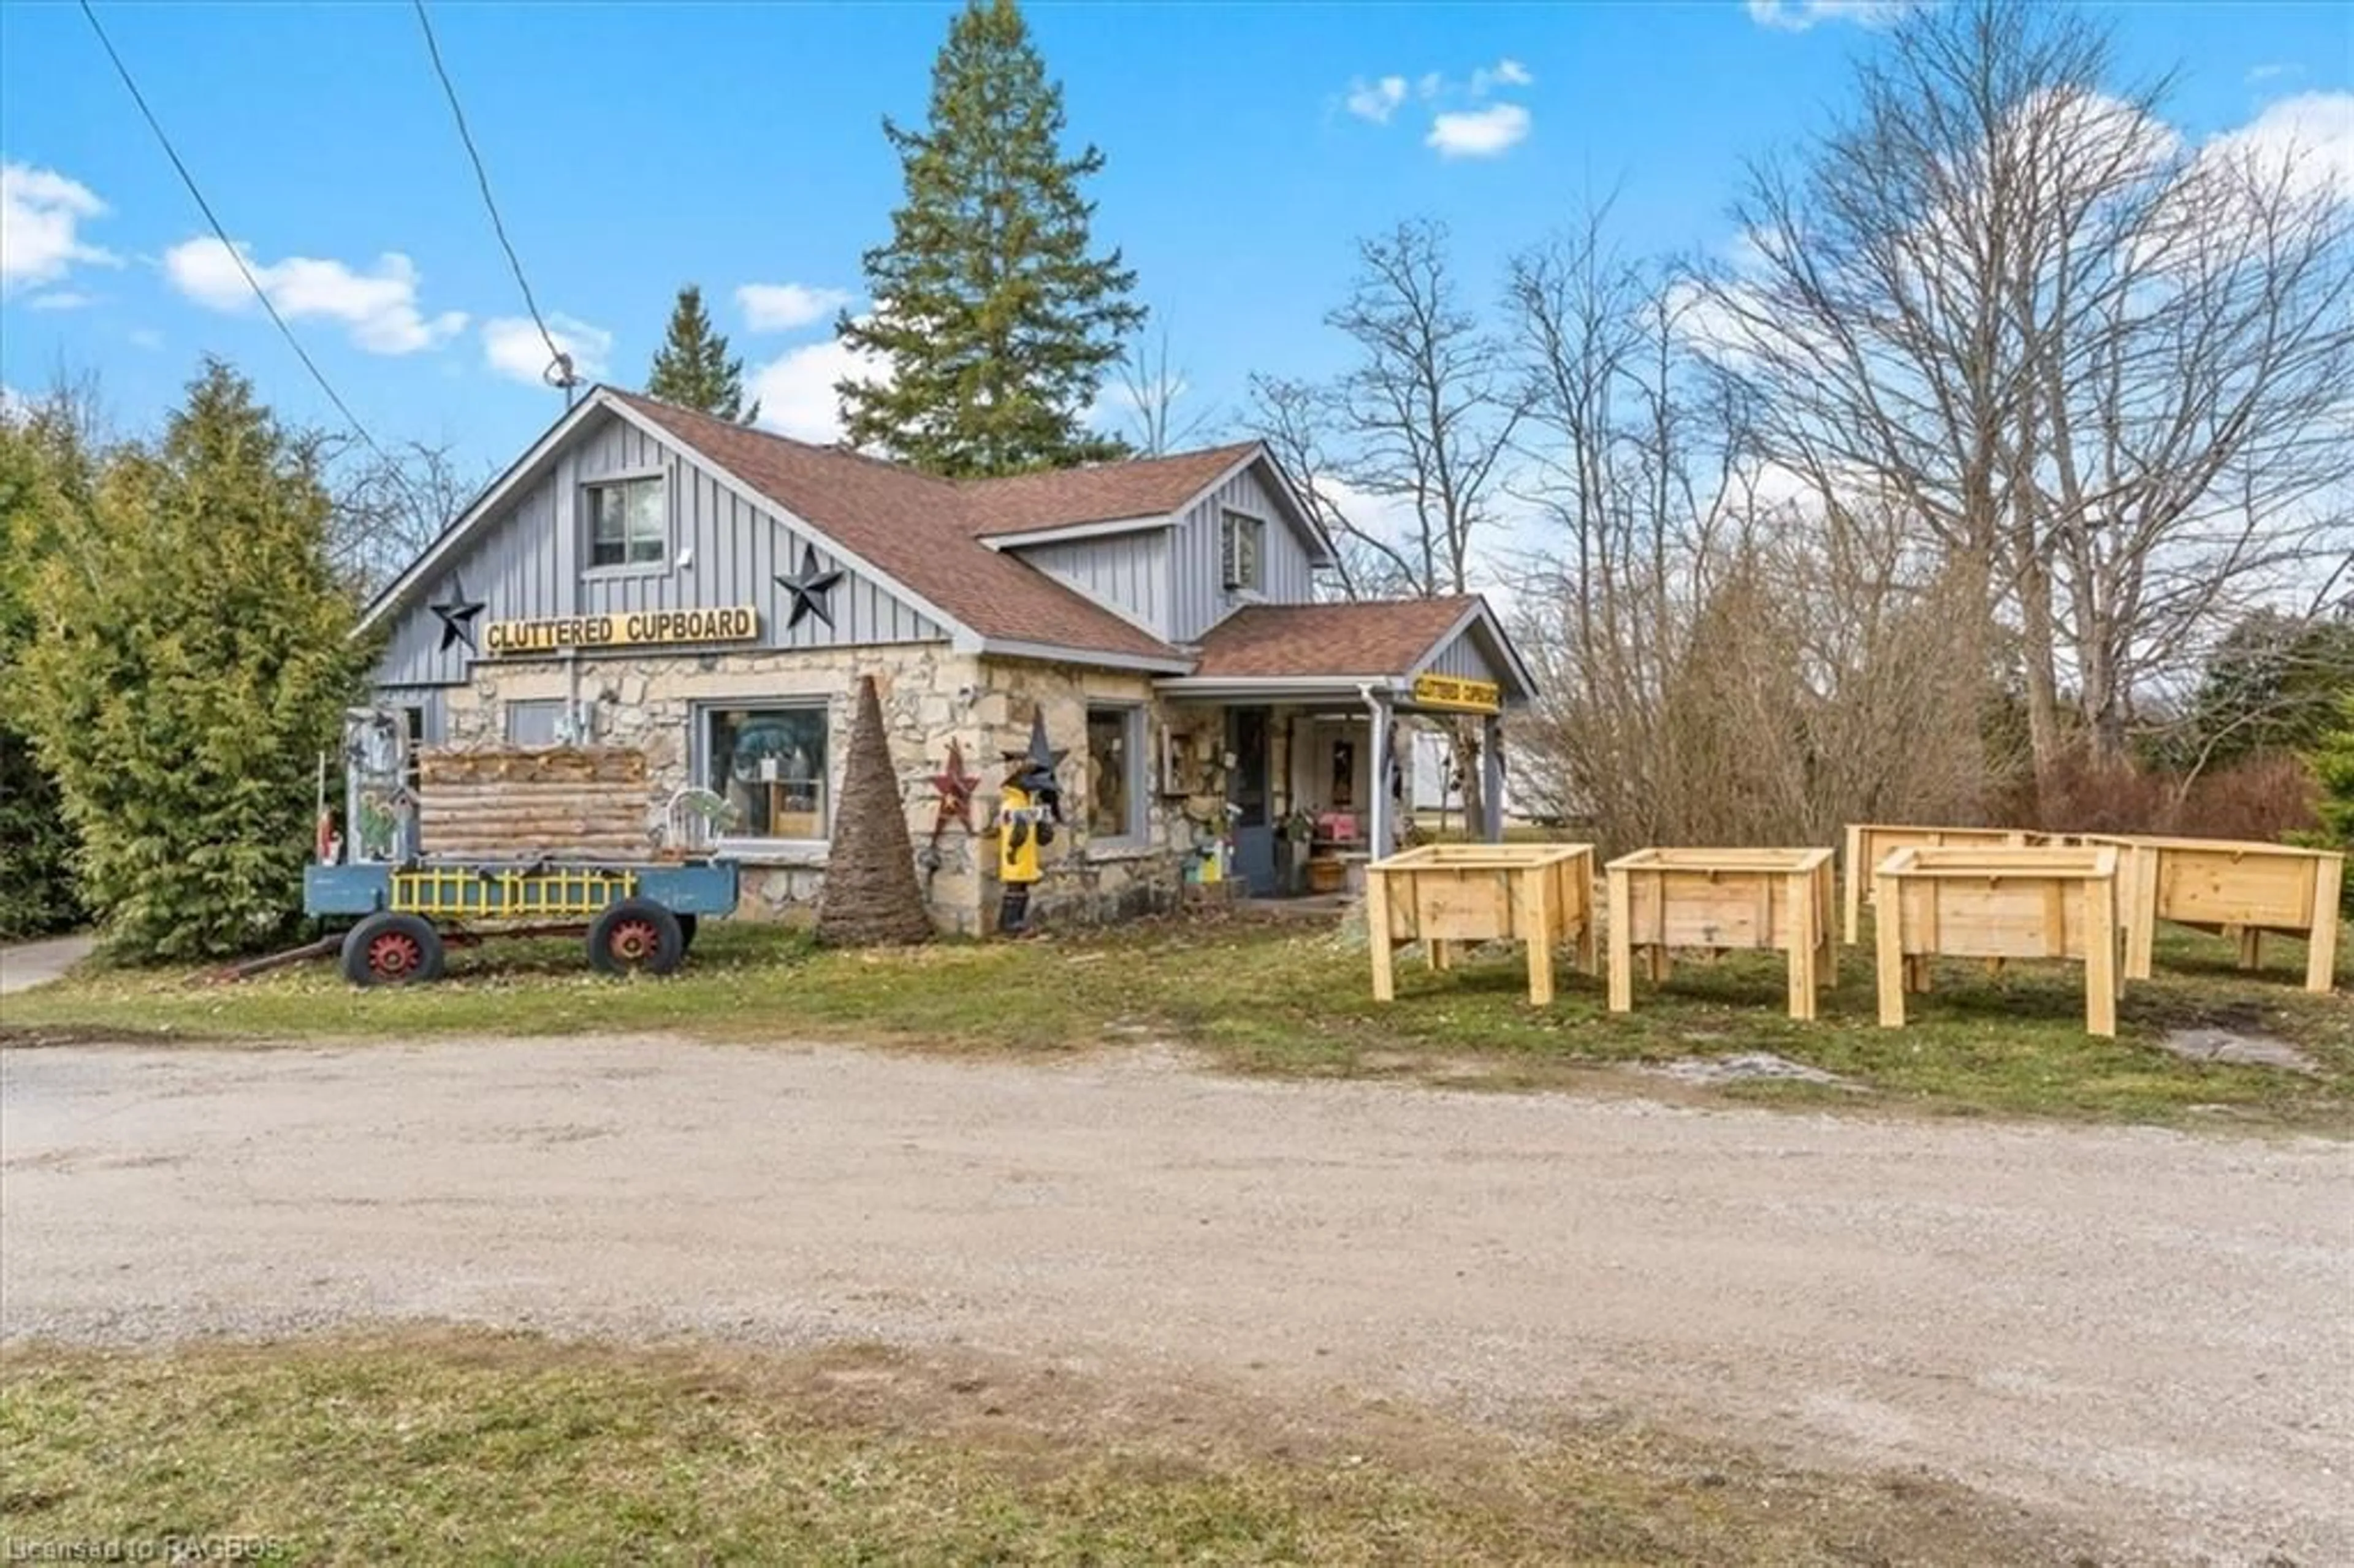 Cottage for 217 Highway 6, South Bruce Peninsula Ontario N0H 2T0